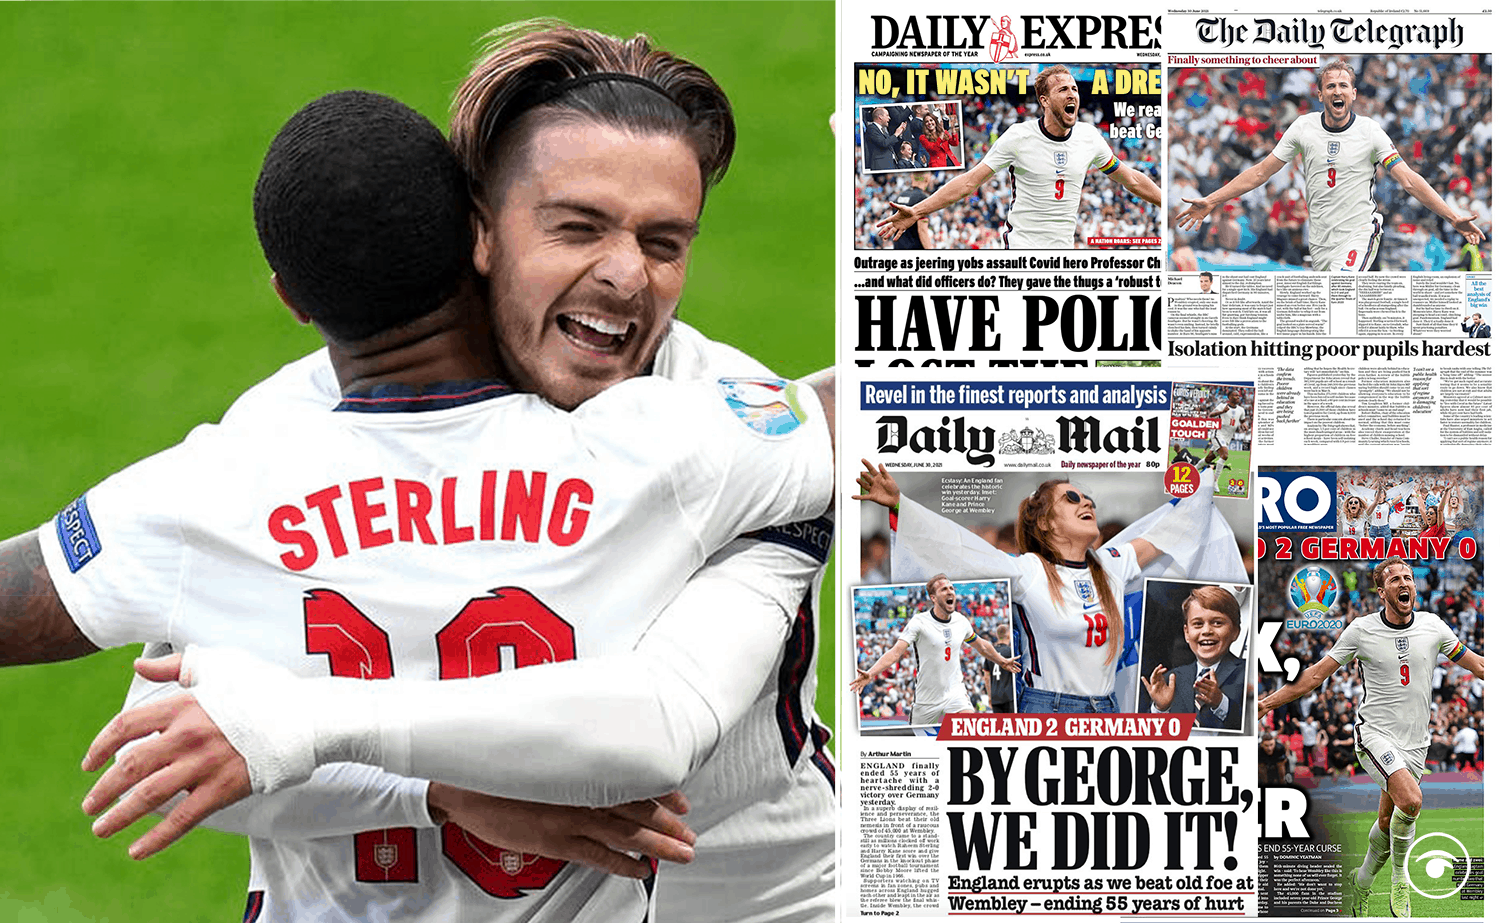 Harry Kane and Prince George dominate front pages as ‘talisman’ Sterling spurned